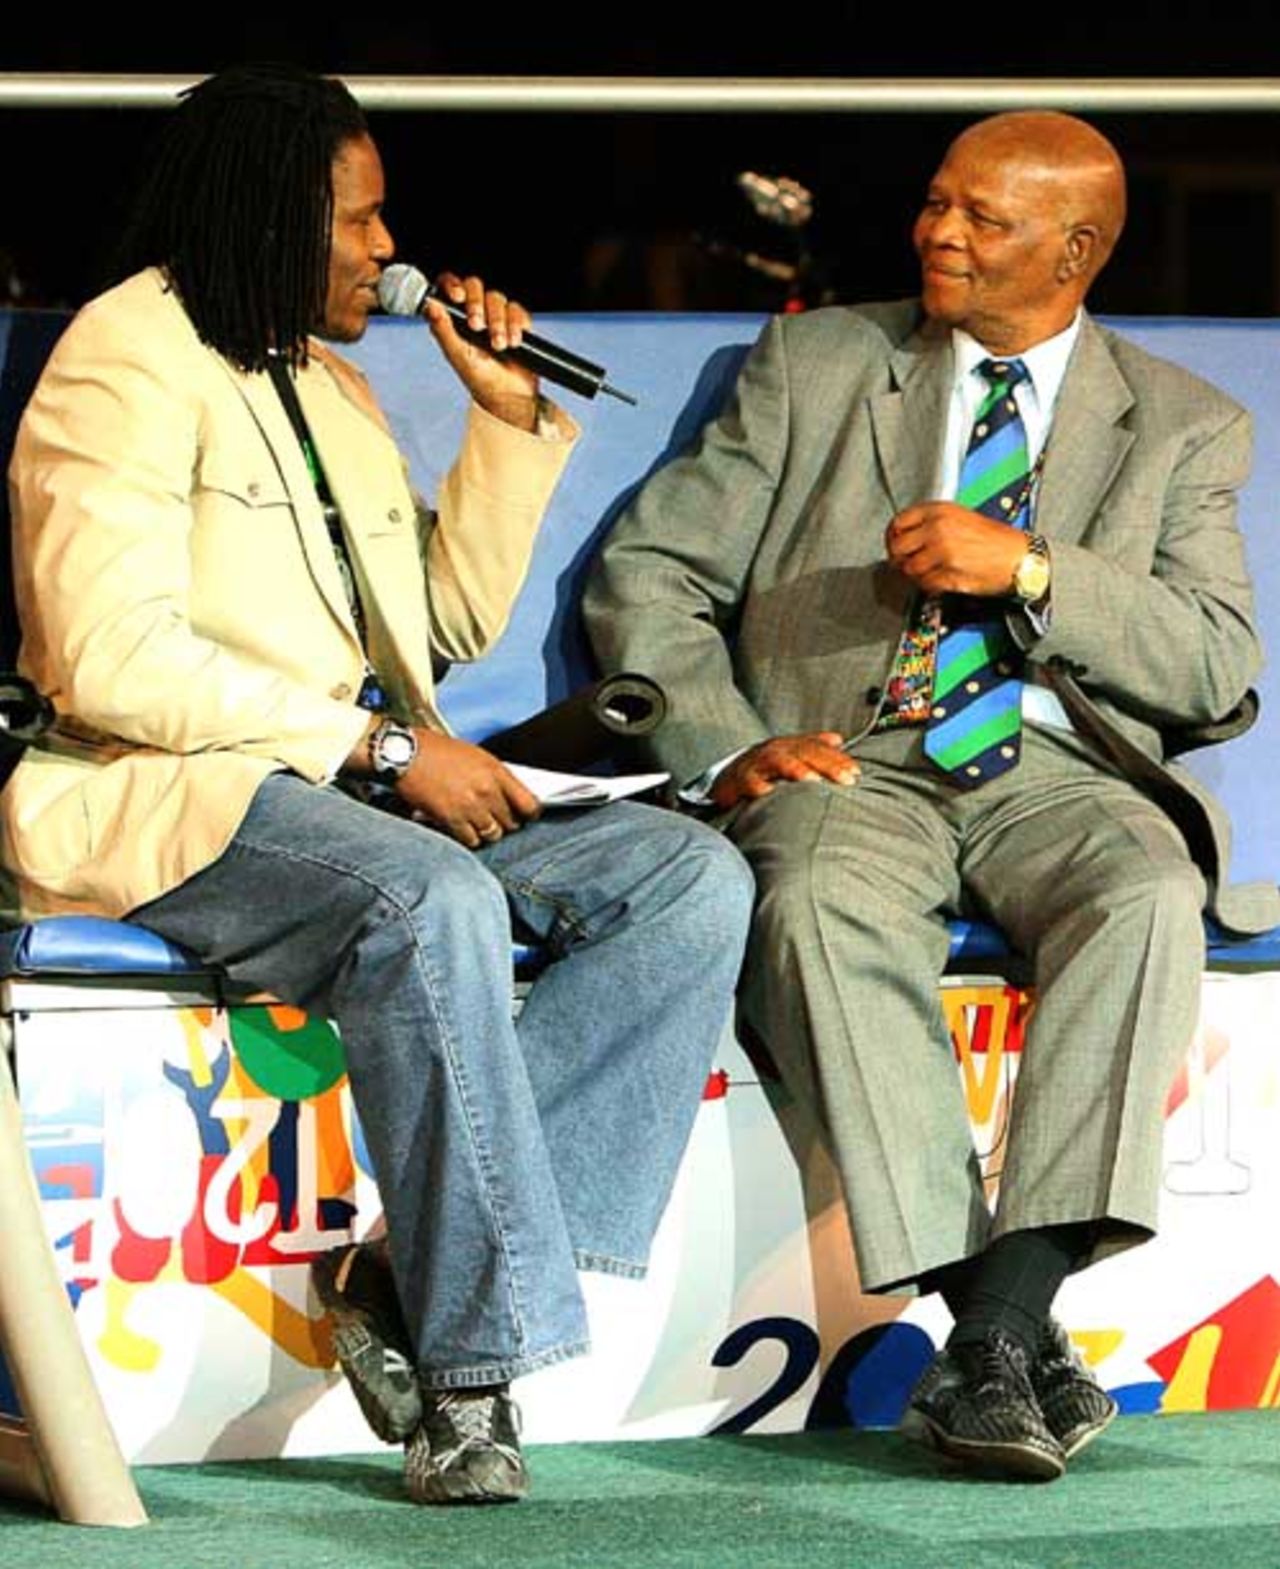  ICC president Ray Mali  is interviewed by Pommie Mbangwa, during the launch of the ICC World Twenty20